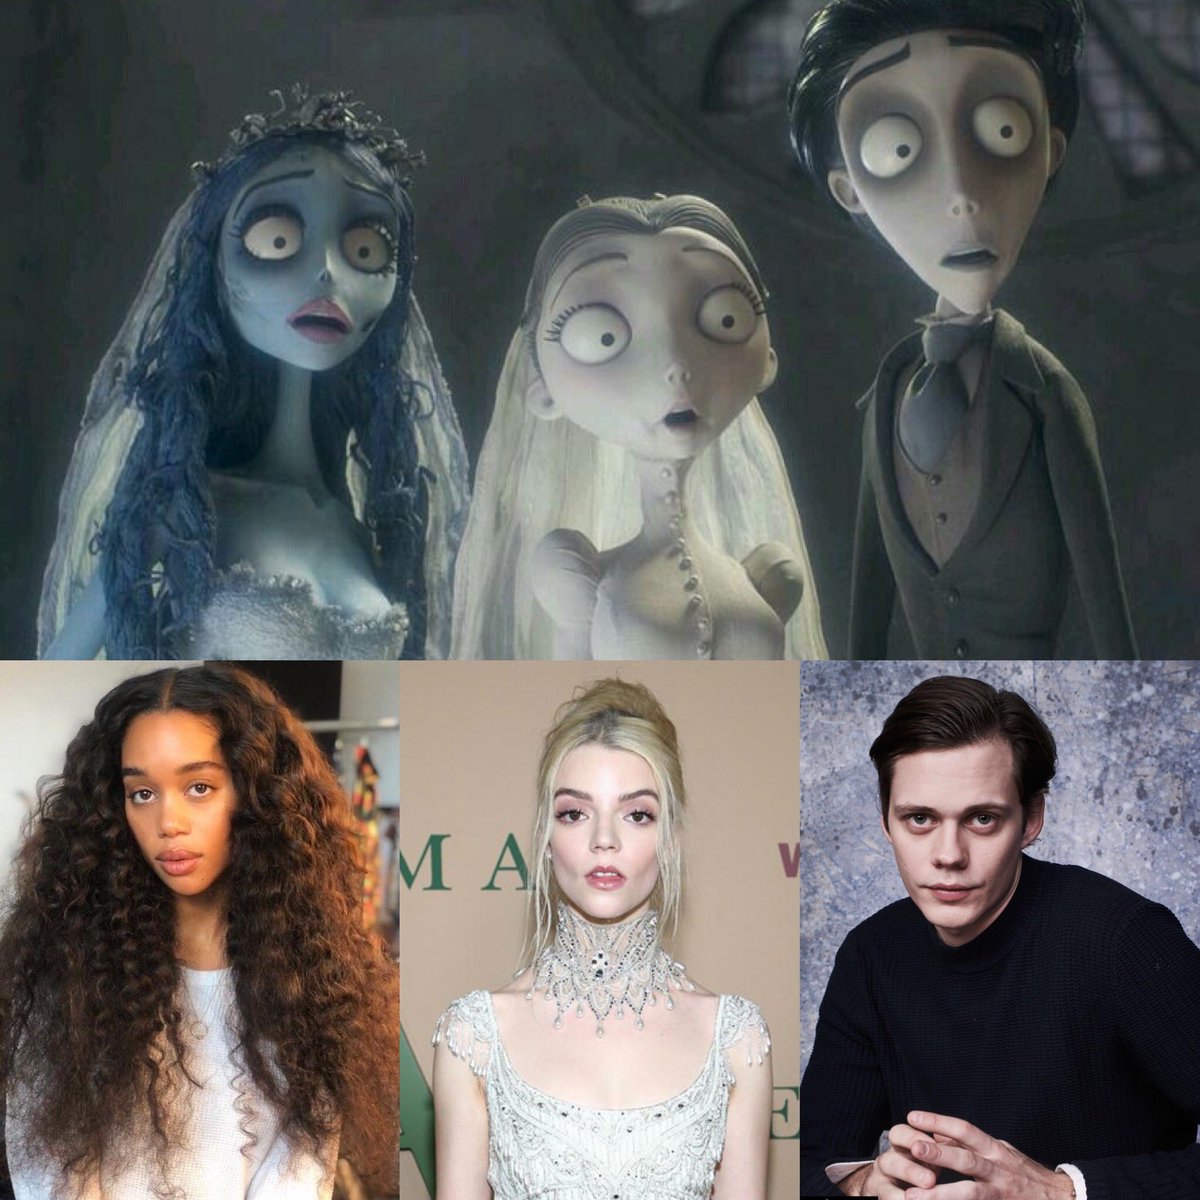 RT @ctrlgrlz: this is the only live action corpse bride cast i will accept https://t.co/GJ8gryMUp2